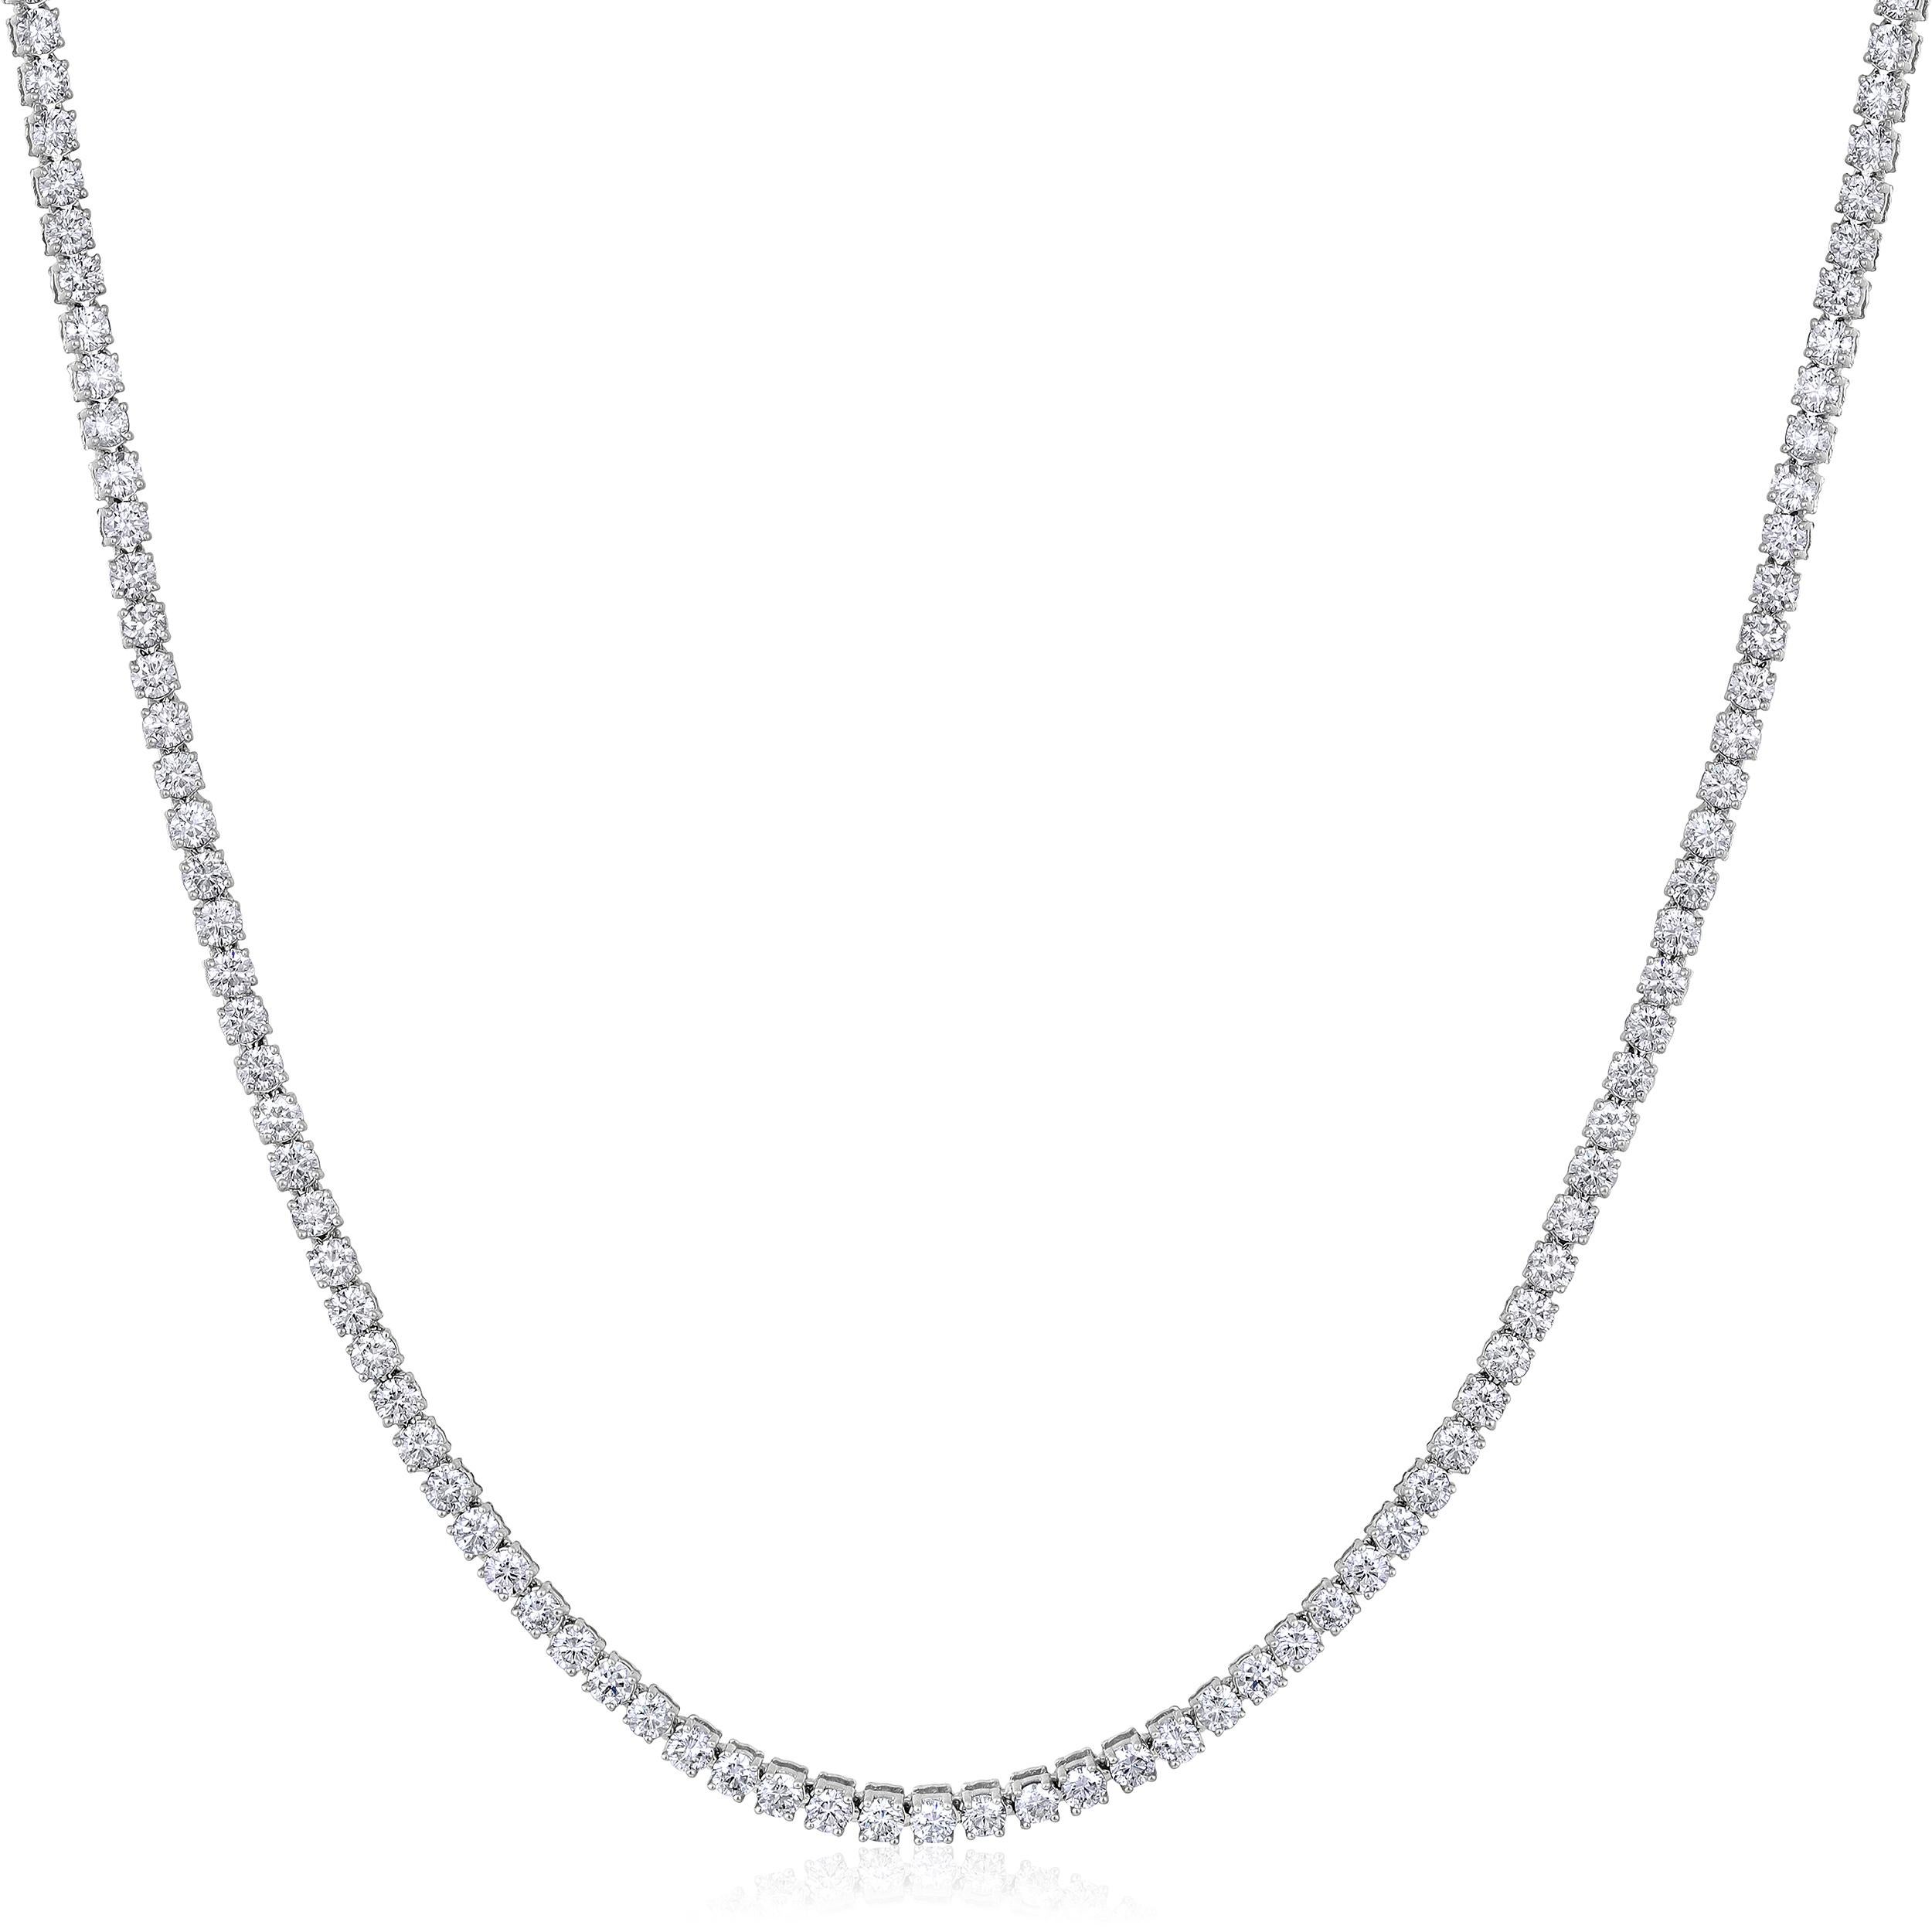 Crafted in 11.9 grams of 14K White Gold, the necklace contains 160 stones of Round Natural Diamonds with a total of 6.91 carat in G-H color and SI clarity. The necklace length is 18 inches.

CONTEMPORARY AND TIMELESS ESSENCE: Crafted in